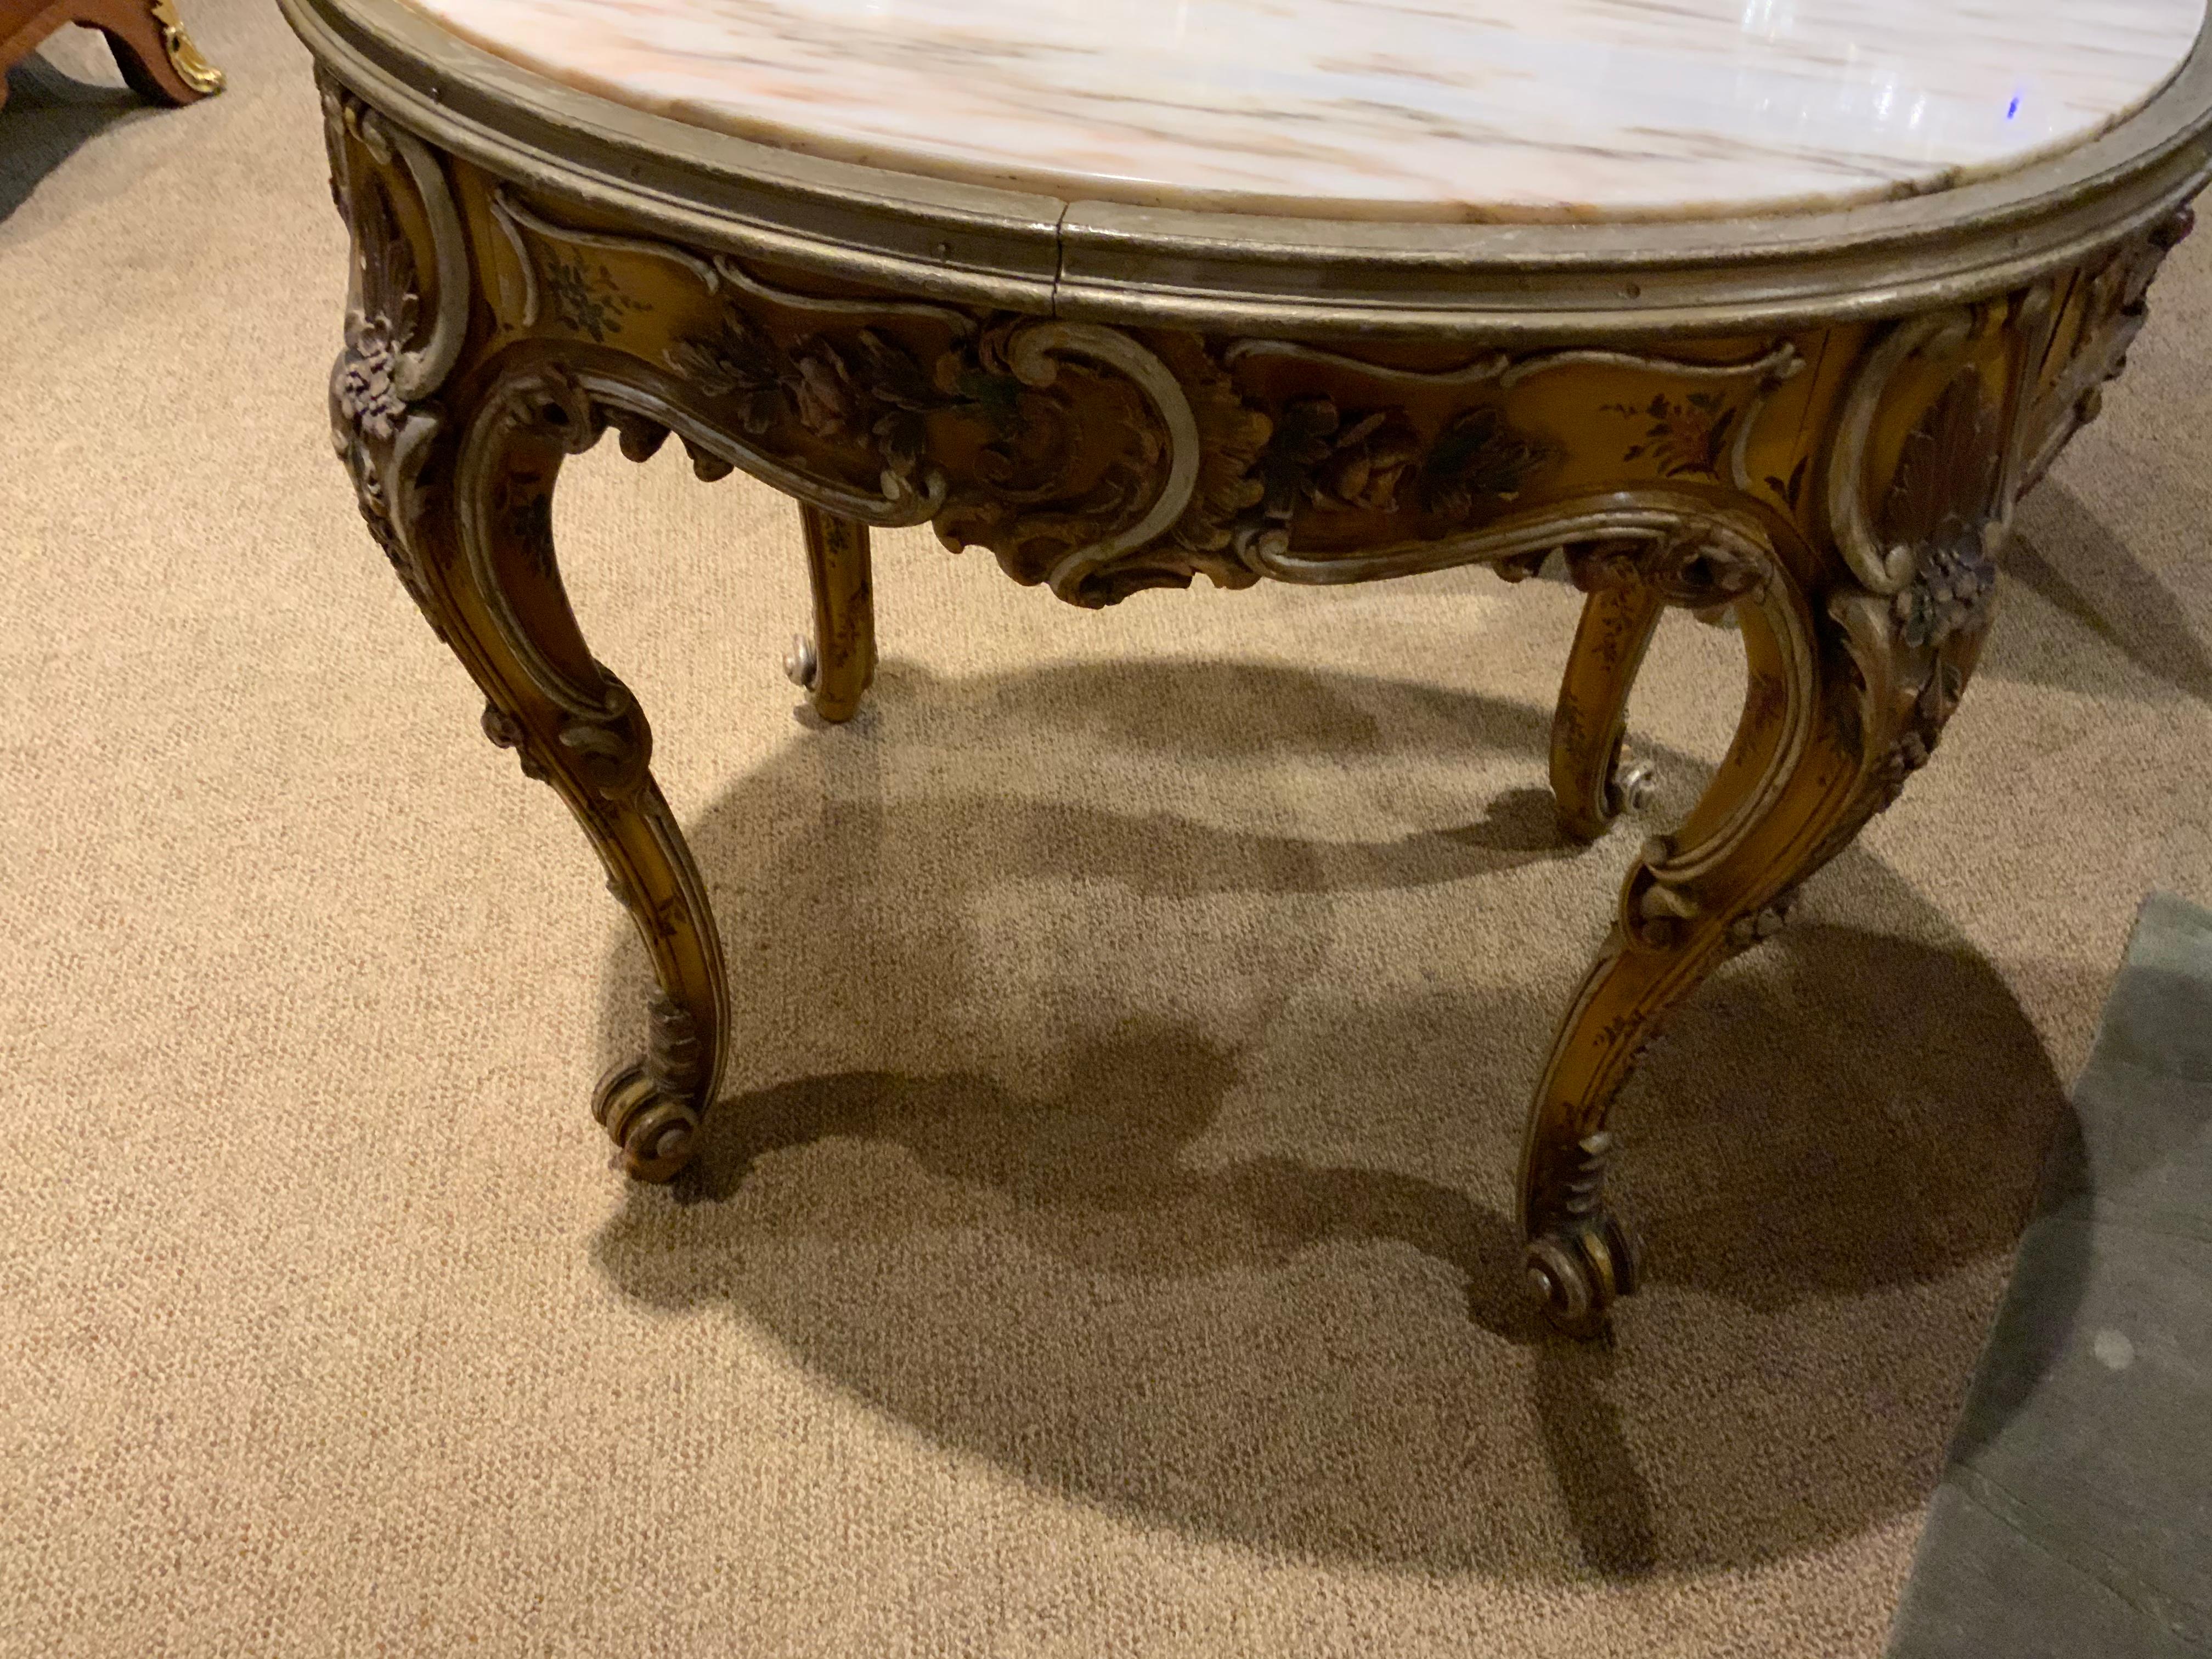 Venetian table that is carved with a floral and Foliate design in gold background and highlighted
With silver edges. The foliate design is green with pale rouge flowers. The legs are scrolling
In the cabriole Louis XV style.